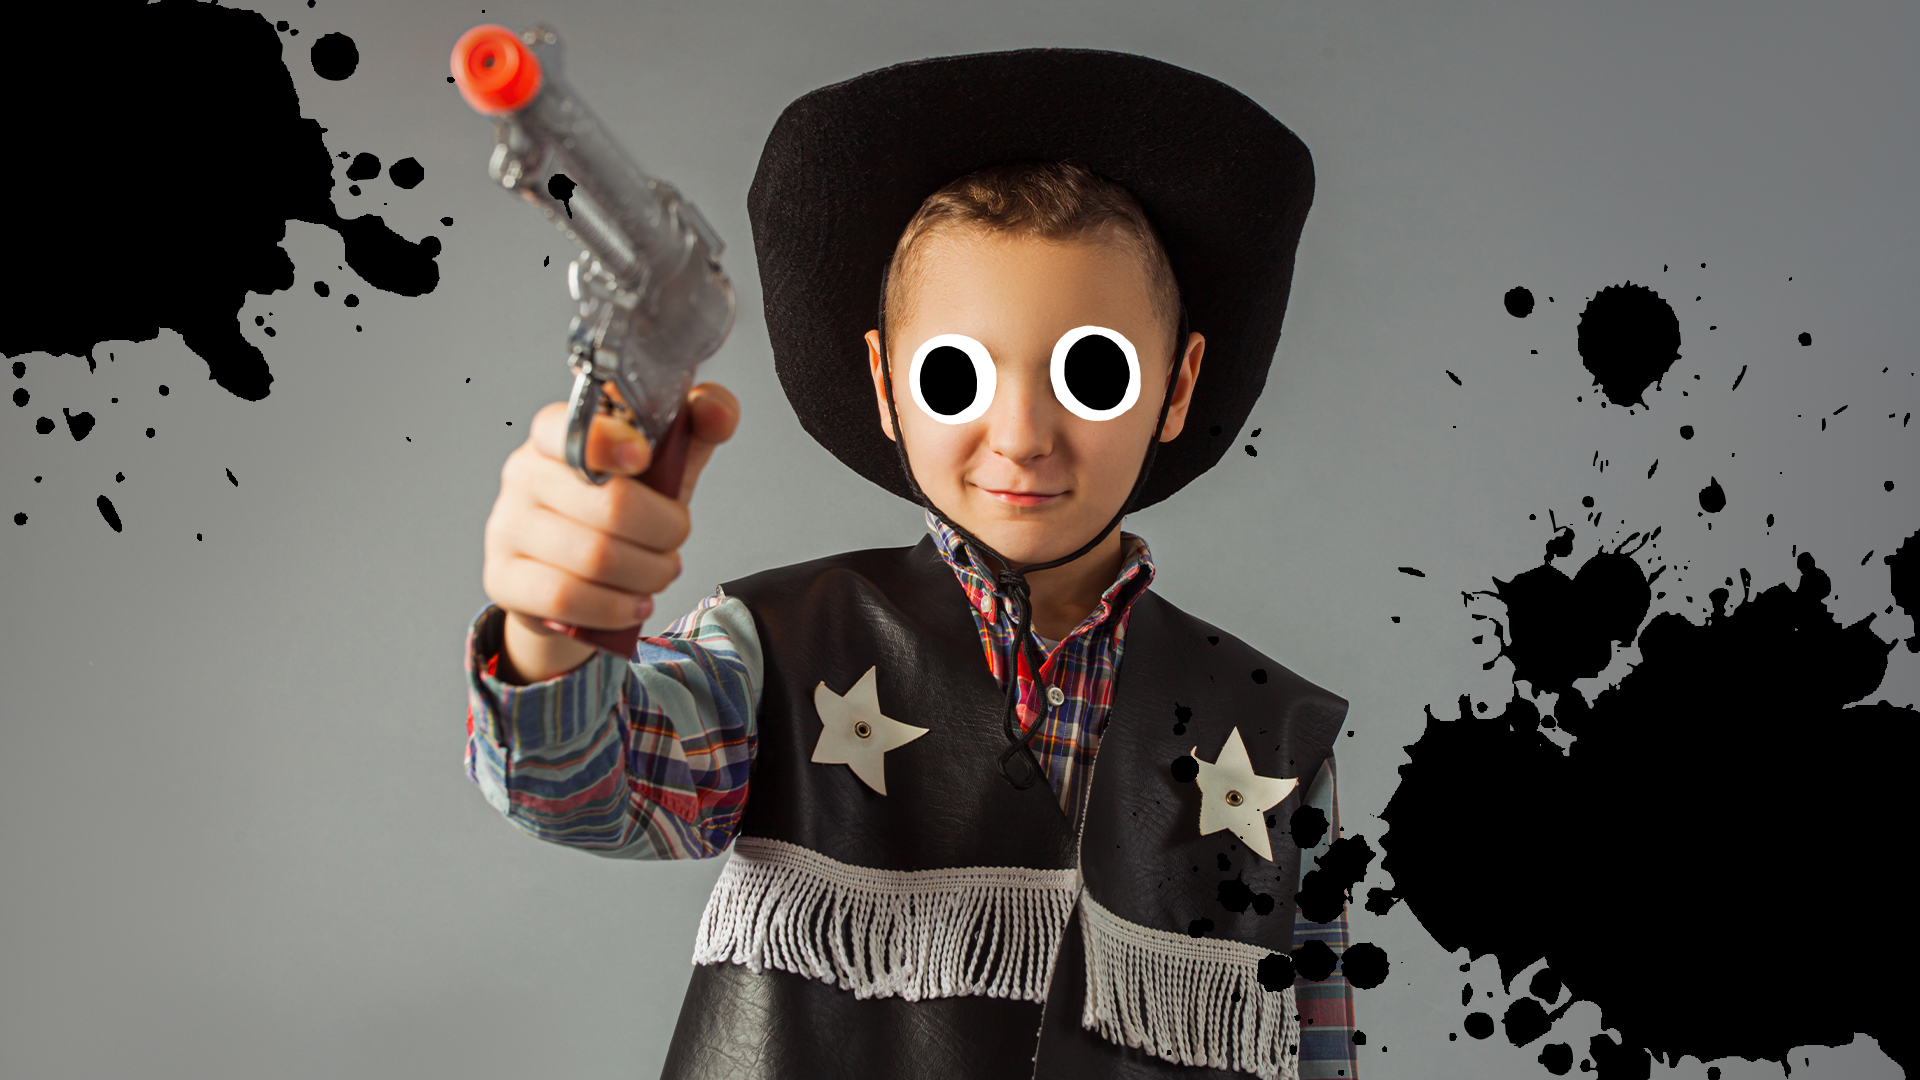 Boy dressed as sheriff with splats